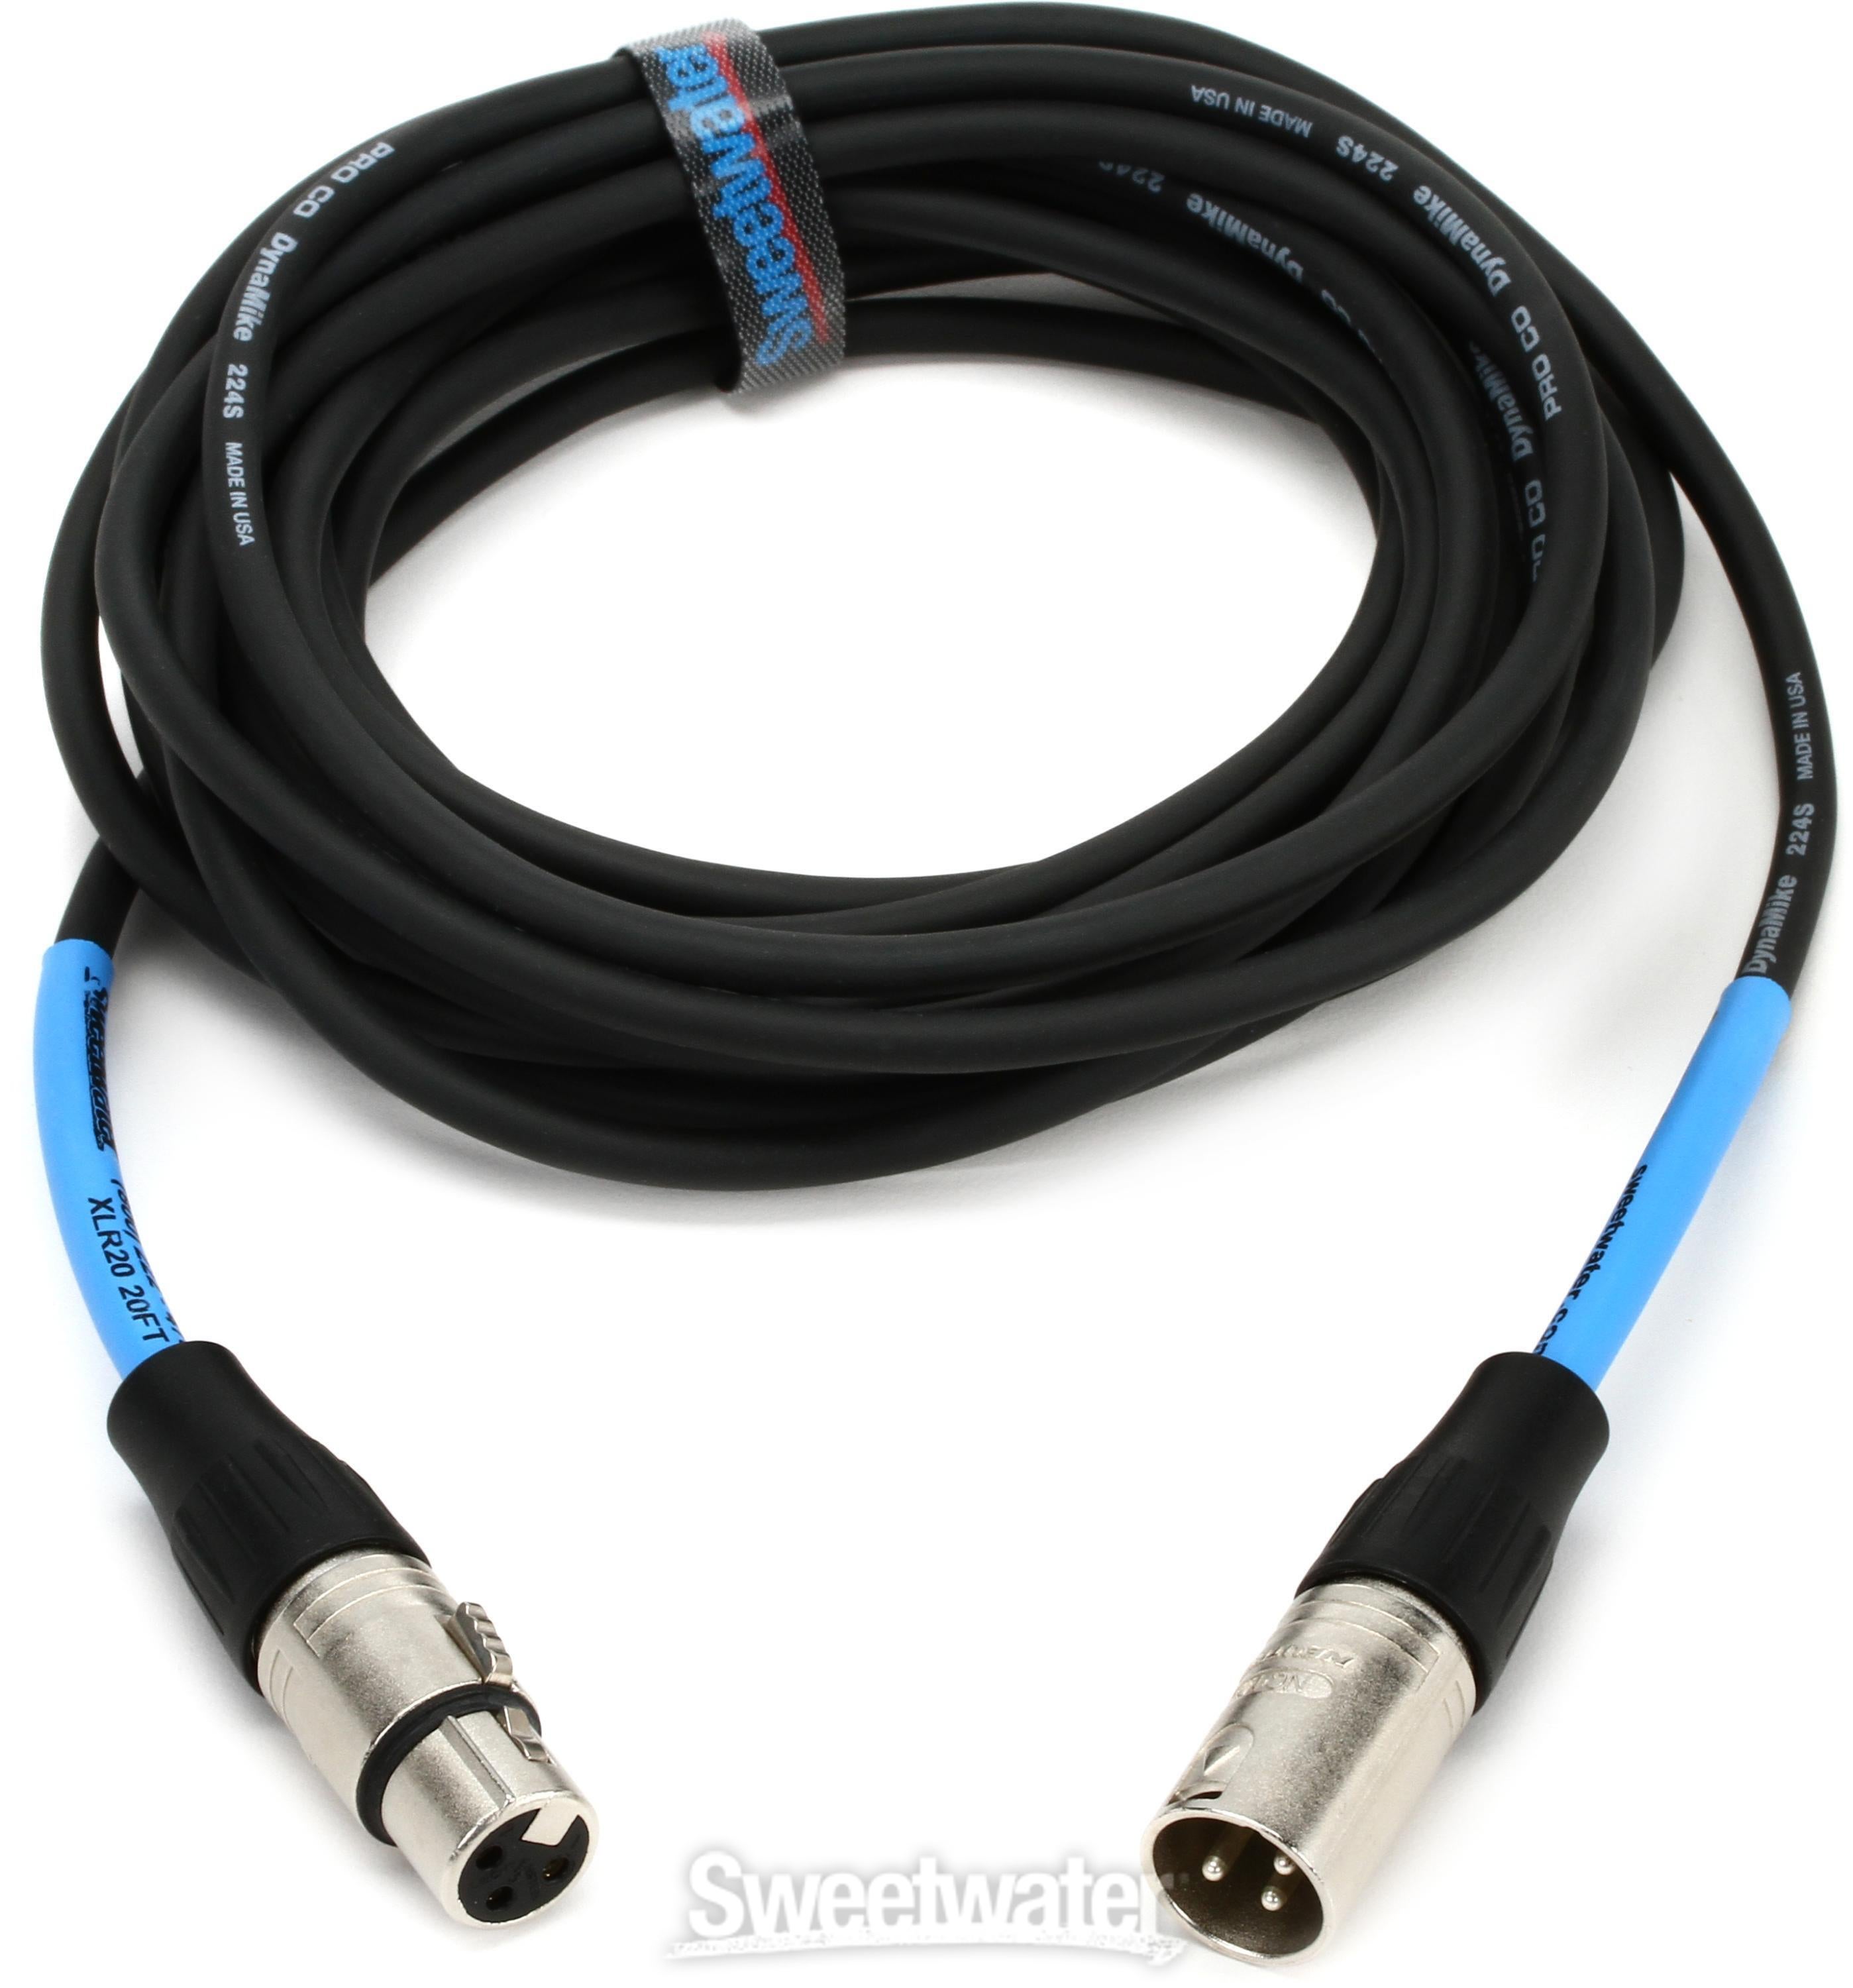 Pro Co EXM-20 Excellines Microphone Cable - 20 foot | Sweetwater